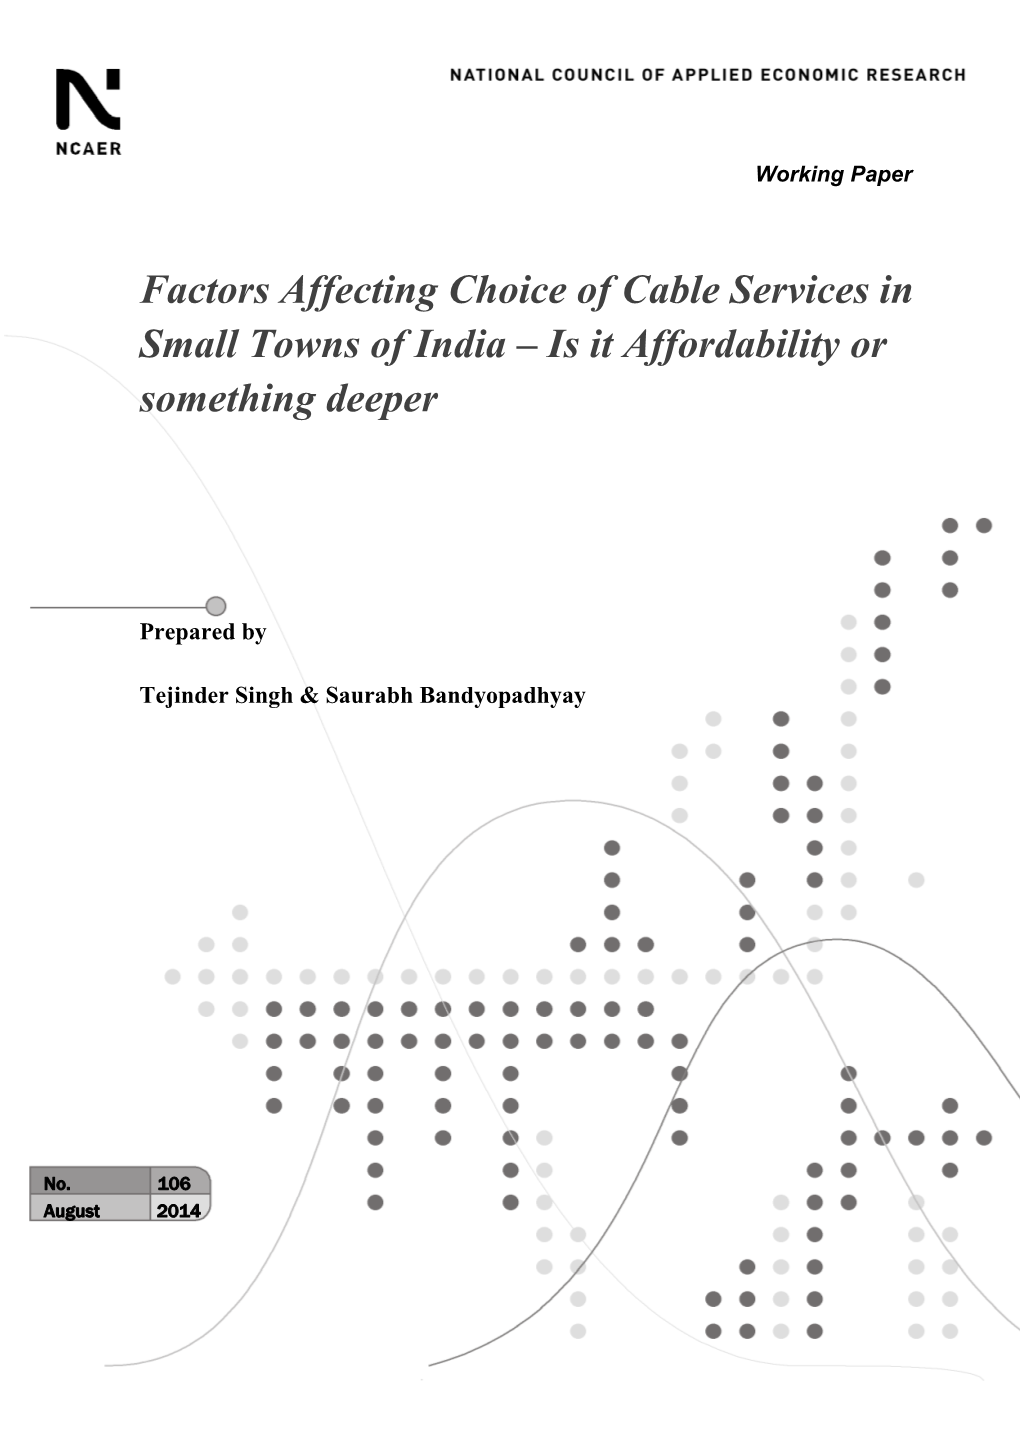 Factors Affecting Choice of Cable Services in Small Towns of India: Is It Affordability Or Something Deeper?